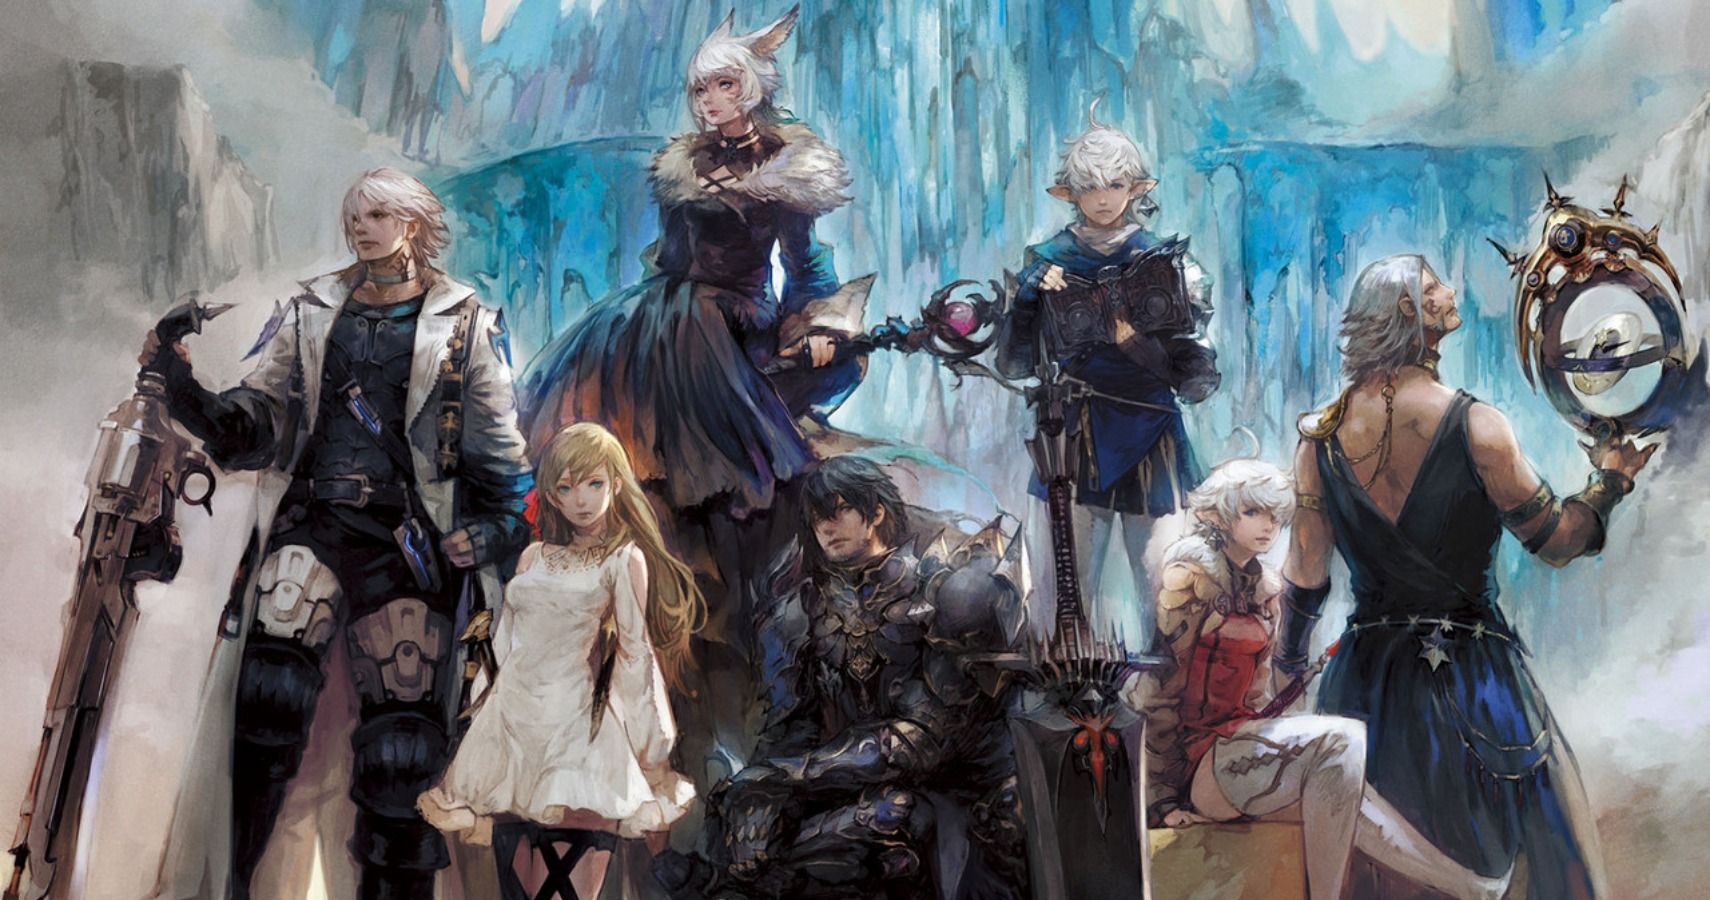 Final Fantasy XIV Has Over 18 Million Registered Players